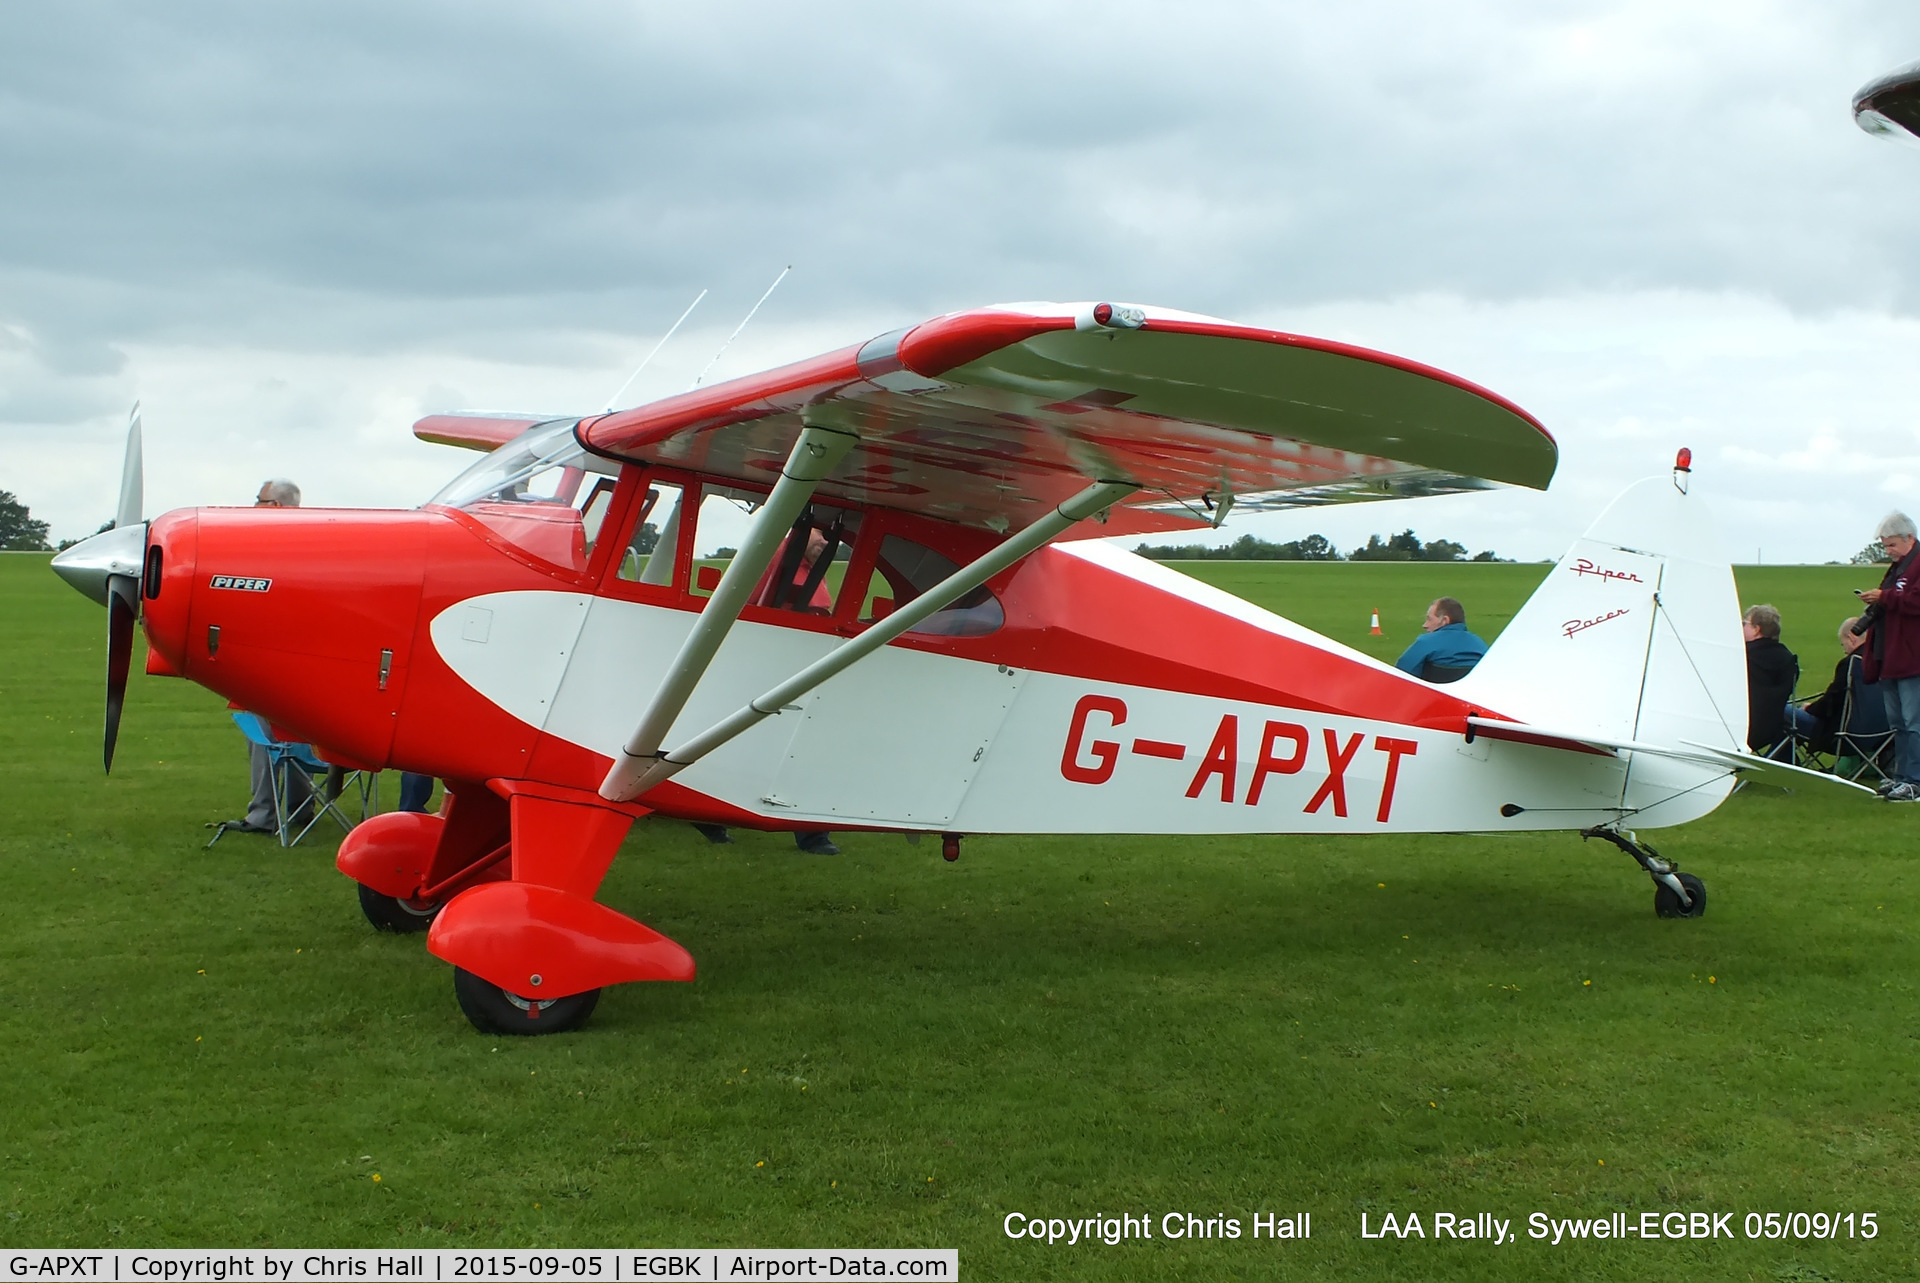 G-APXT, 1956 Piper PA-22-150 Caribbean C/N 22-3854, at the LAA Rally 2015, Sywell